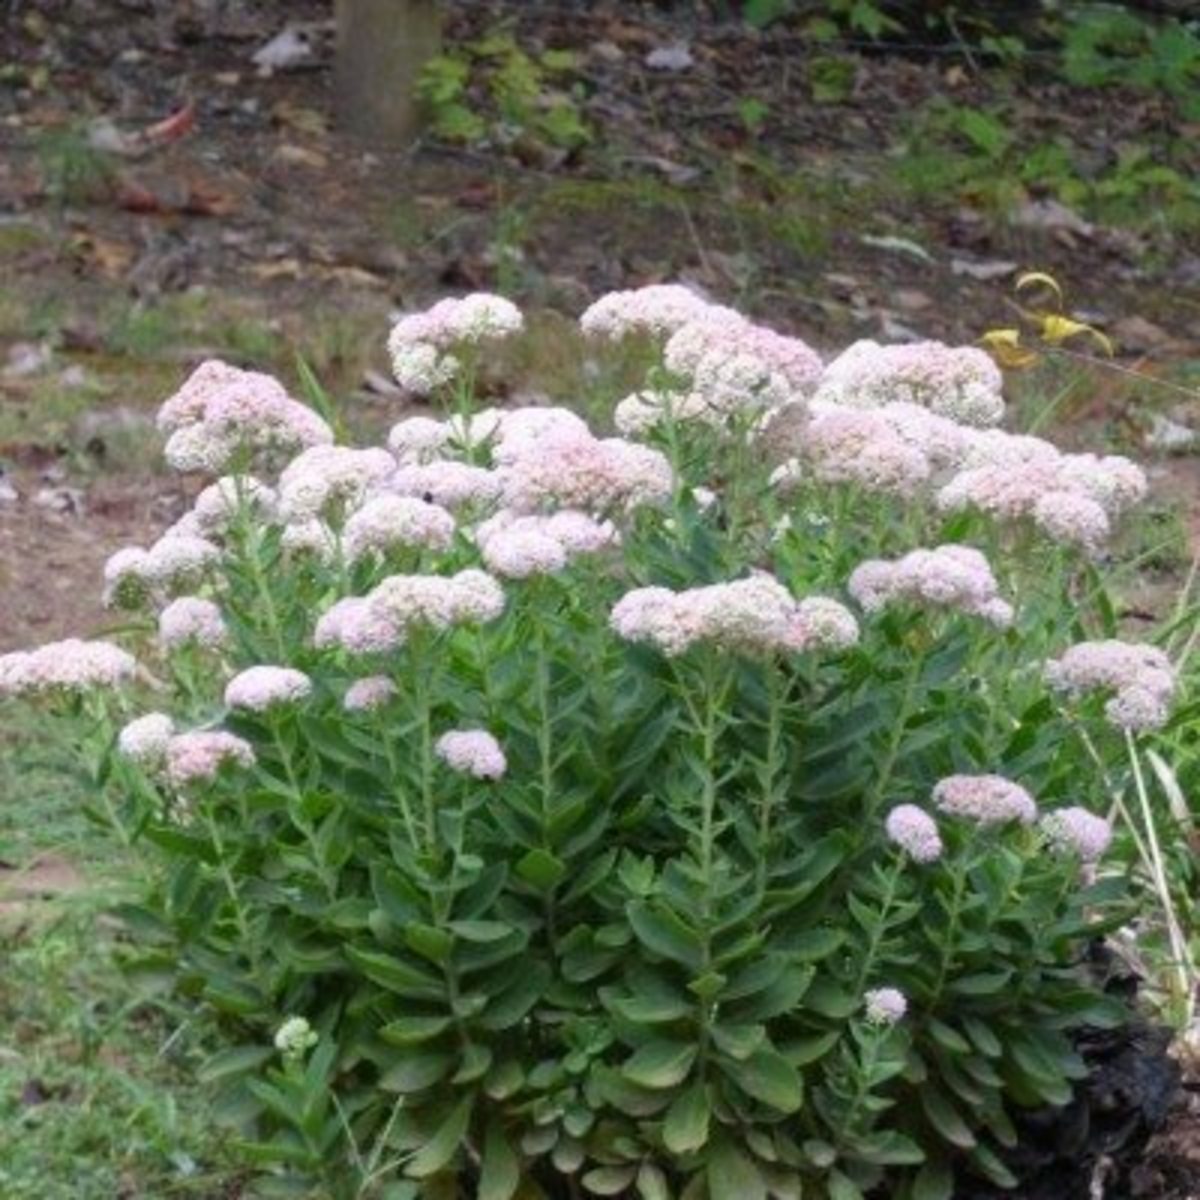 These delicate perennials are used for cuttings from early spring to fall.